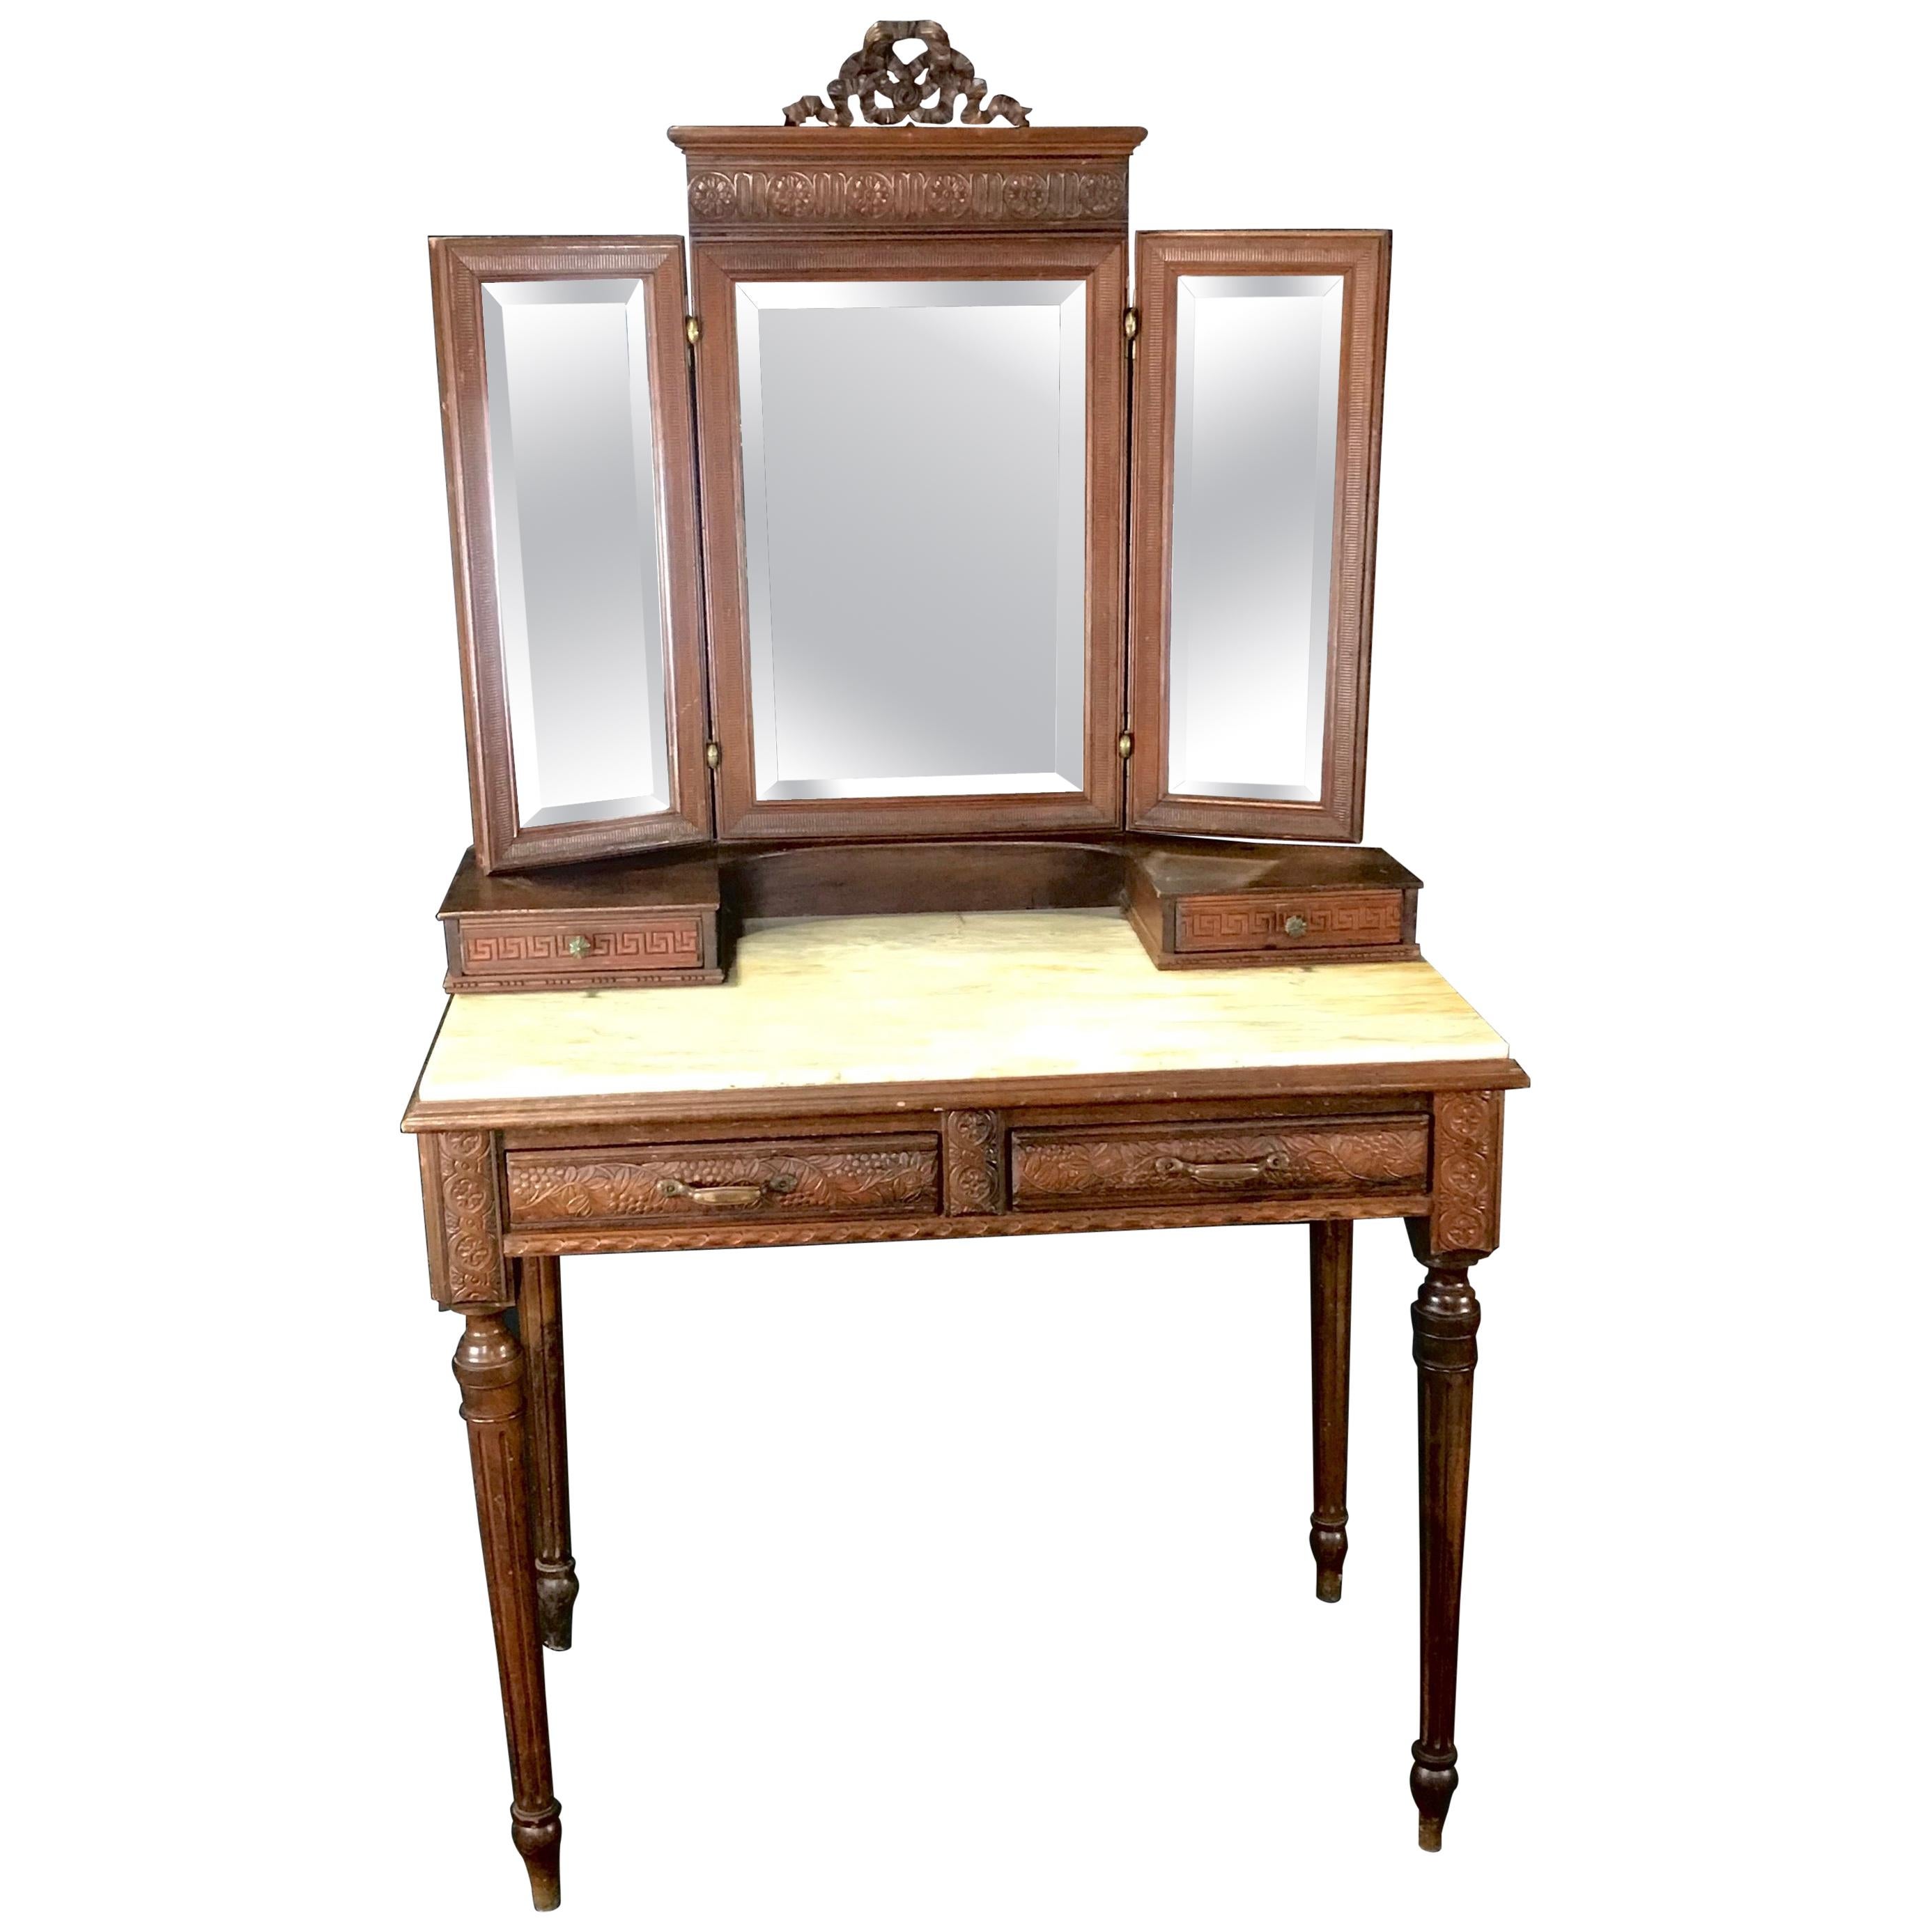 Gorgeous French Walnut Carved Dressing Table with Carrera Marble Top